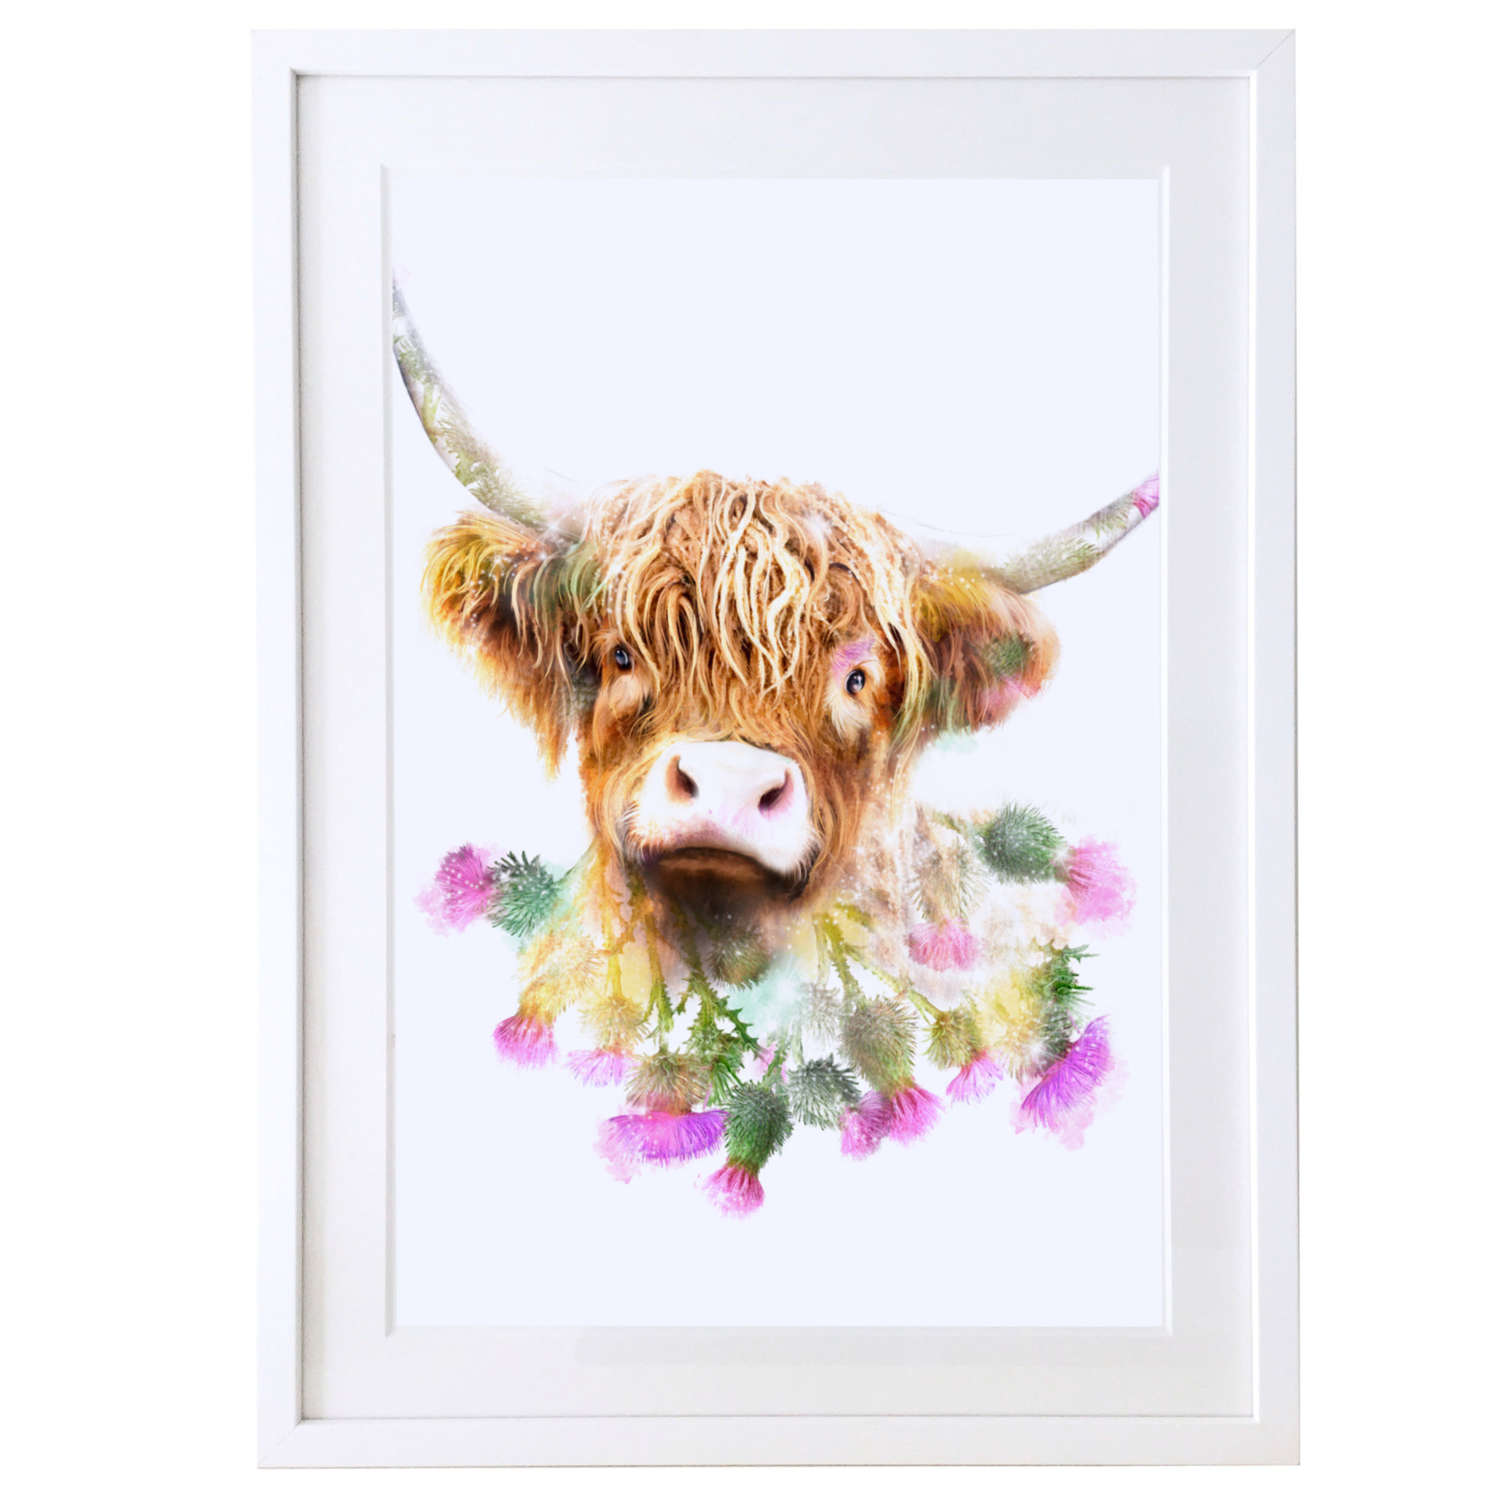 Highland cow print with white satin finish solid wood frame